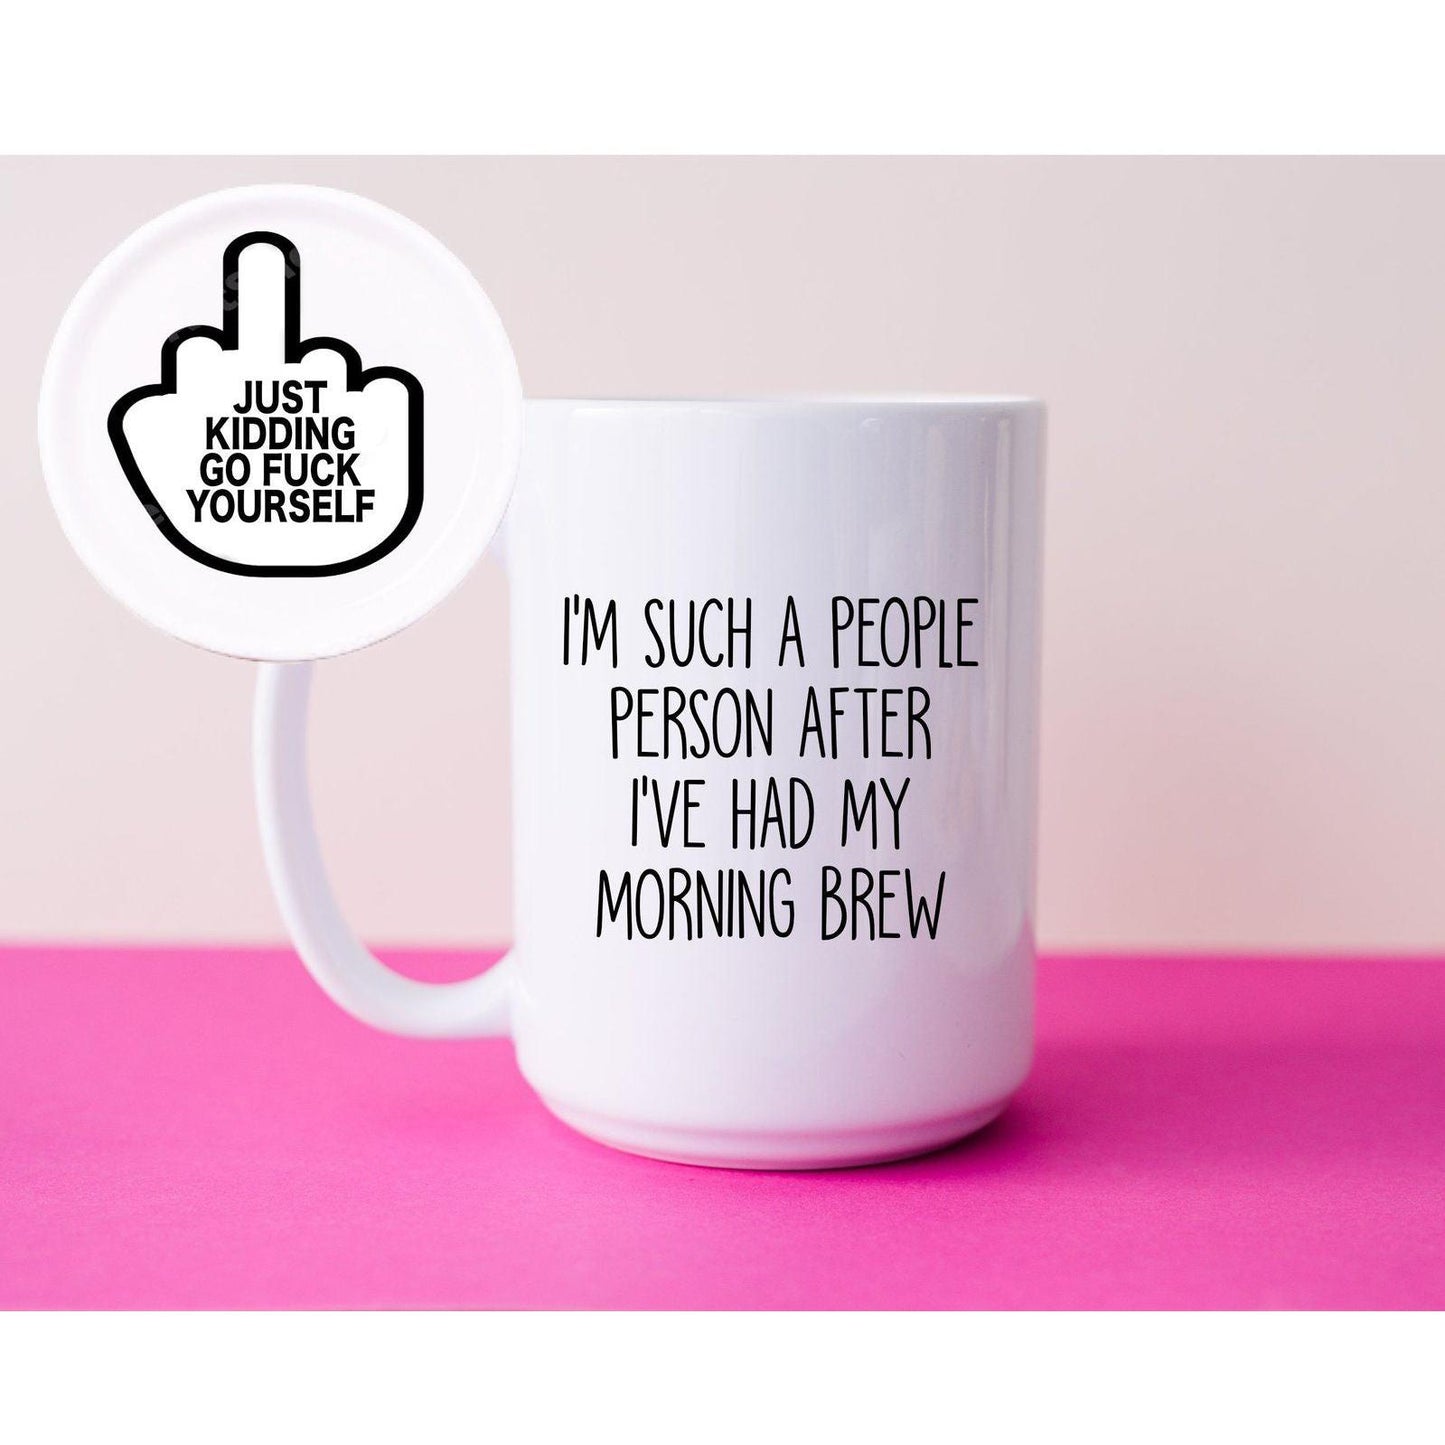 Mug- I'm Such A People Person After My Morning Brew (Just kidding go fuck yourself)